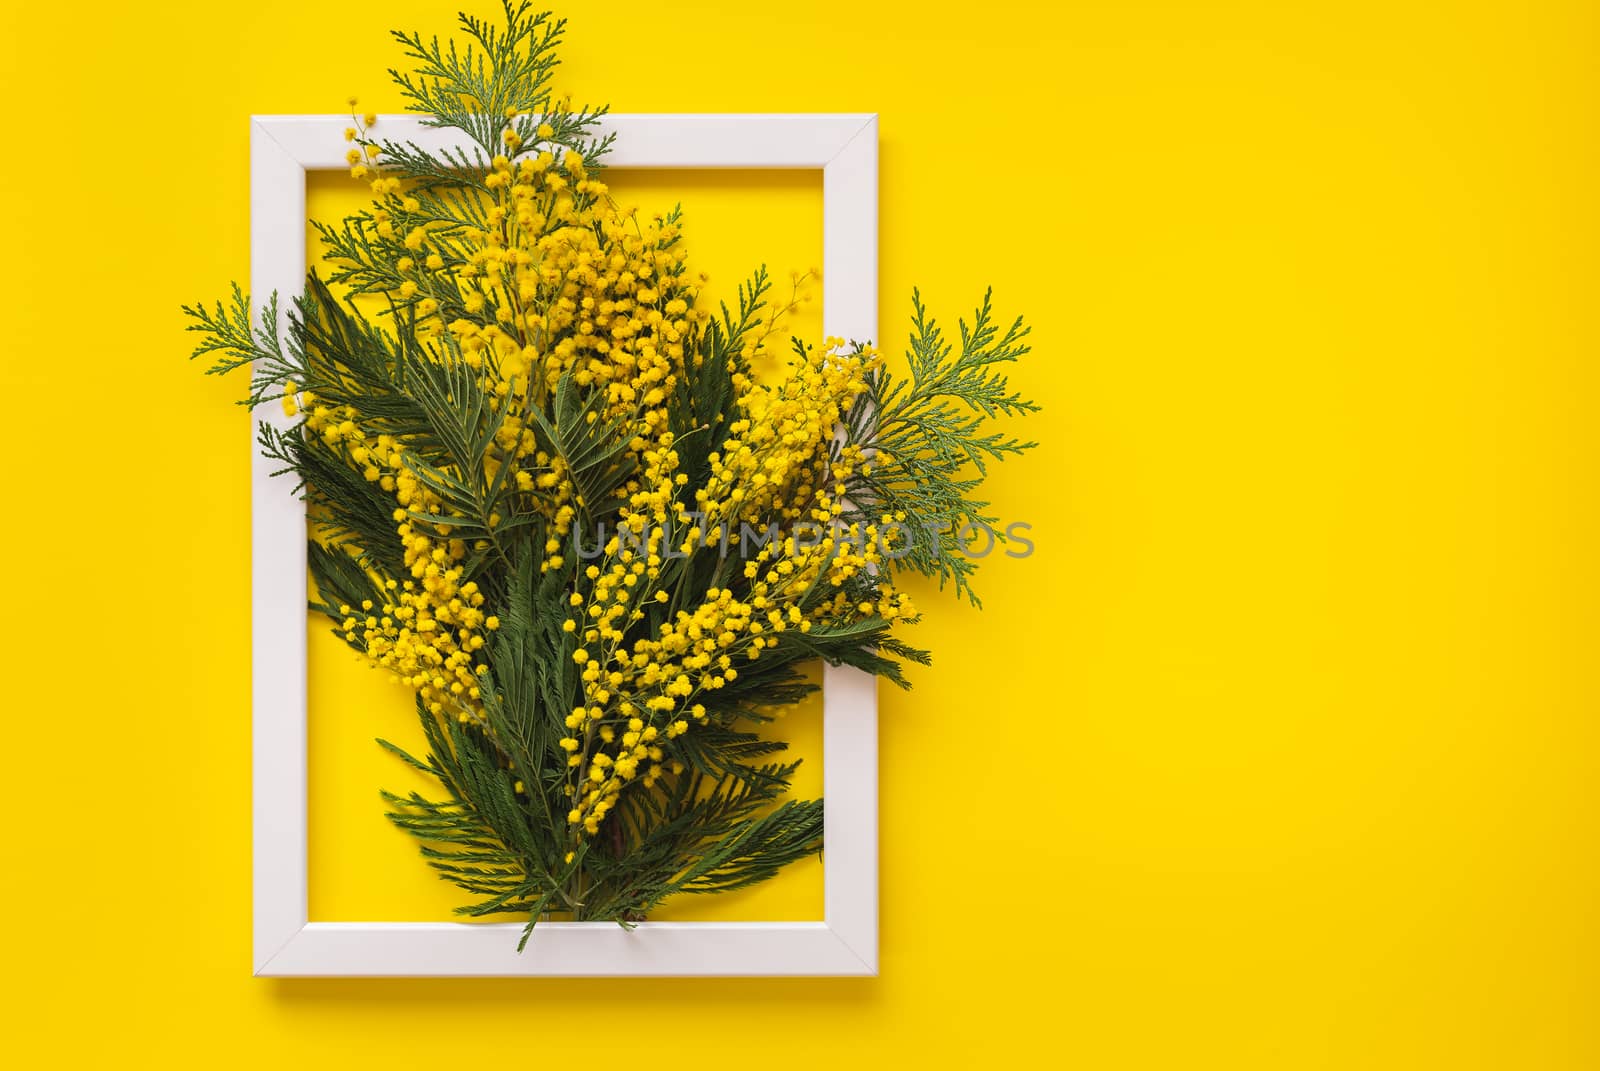 Mimosa flowers and green branches  on yellow pattern texture of crumpled paper with white photo frame, yellow background by Slast20